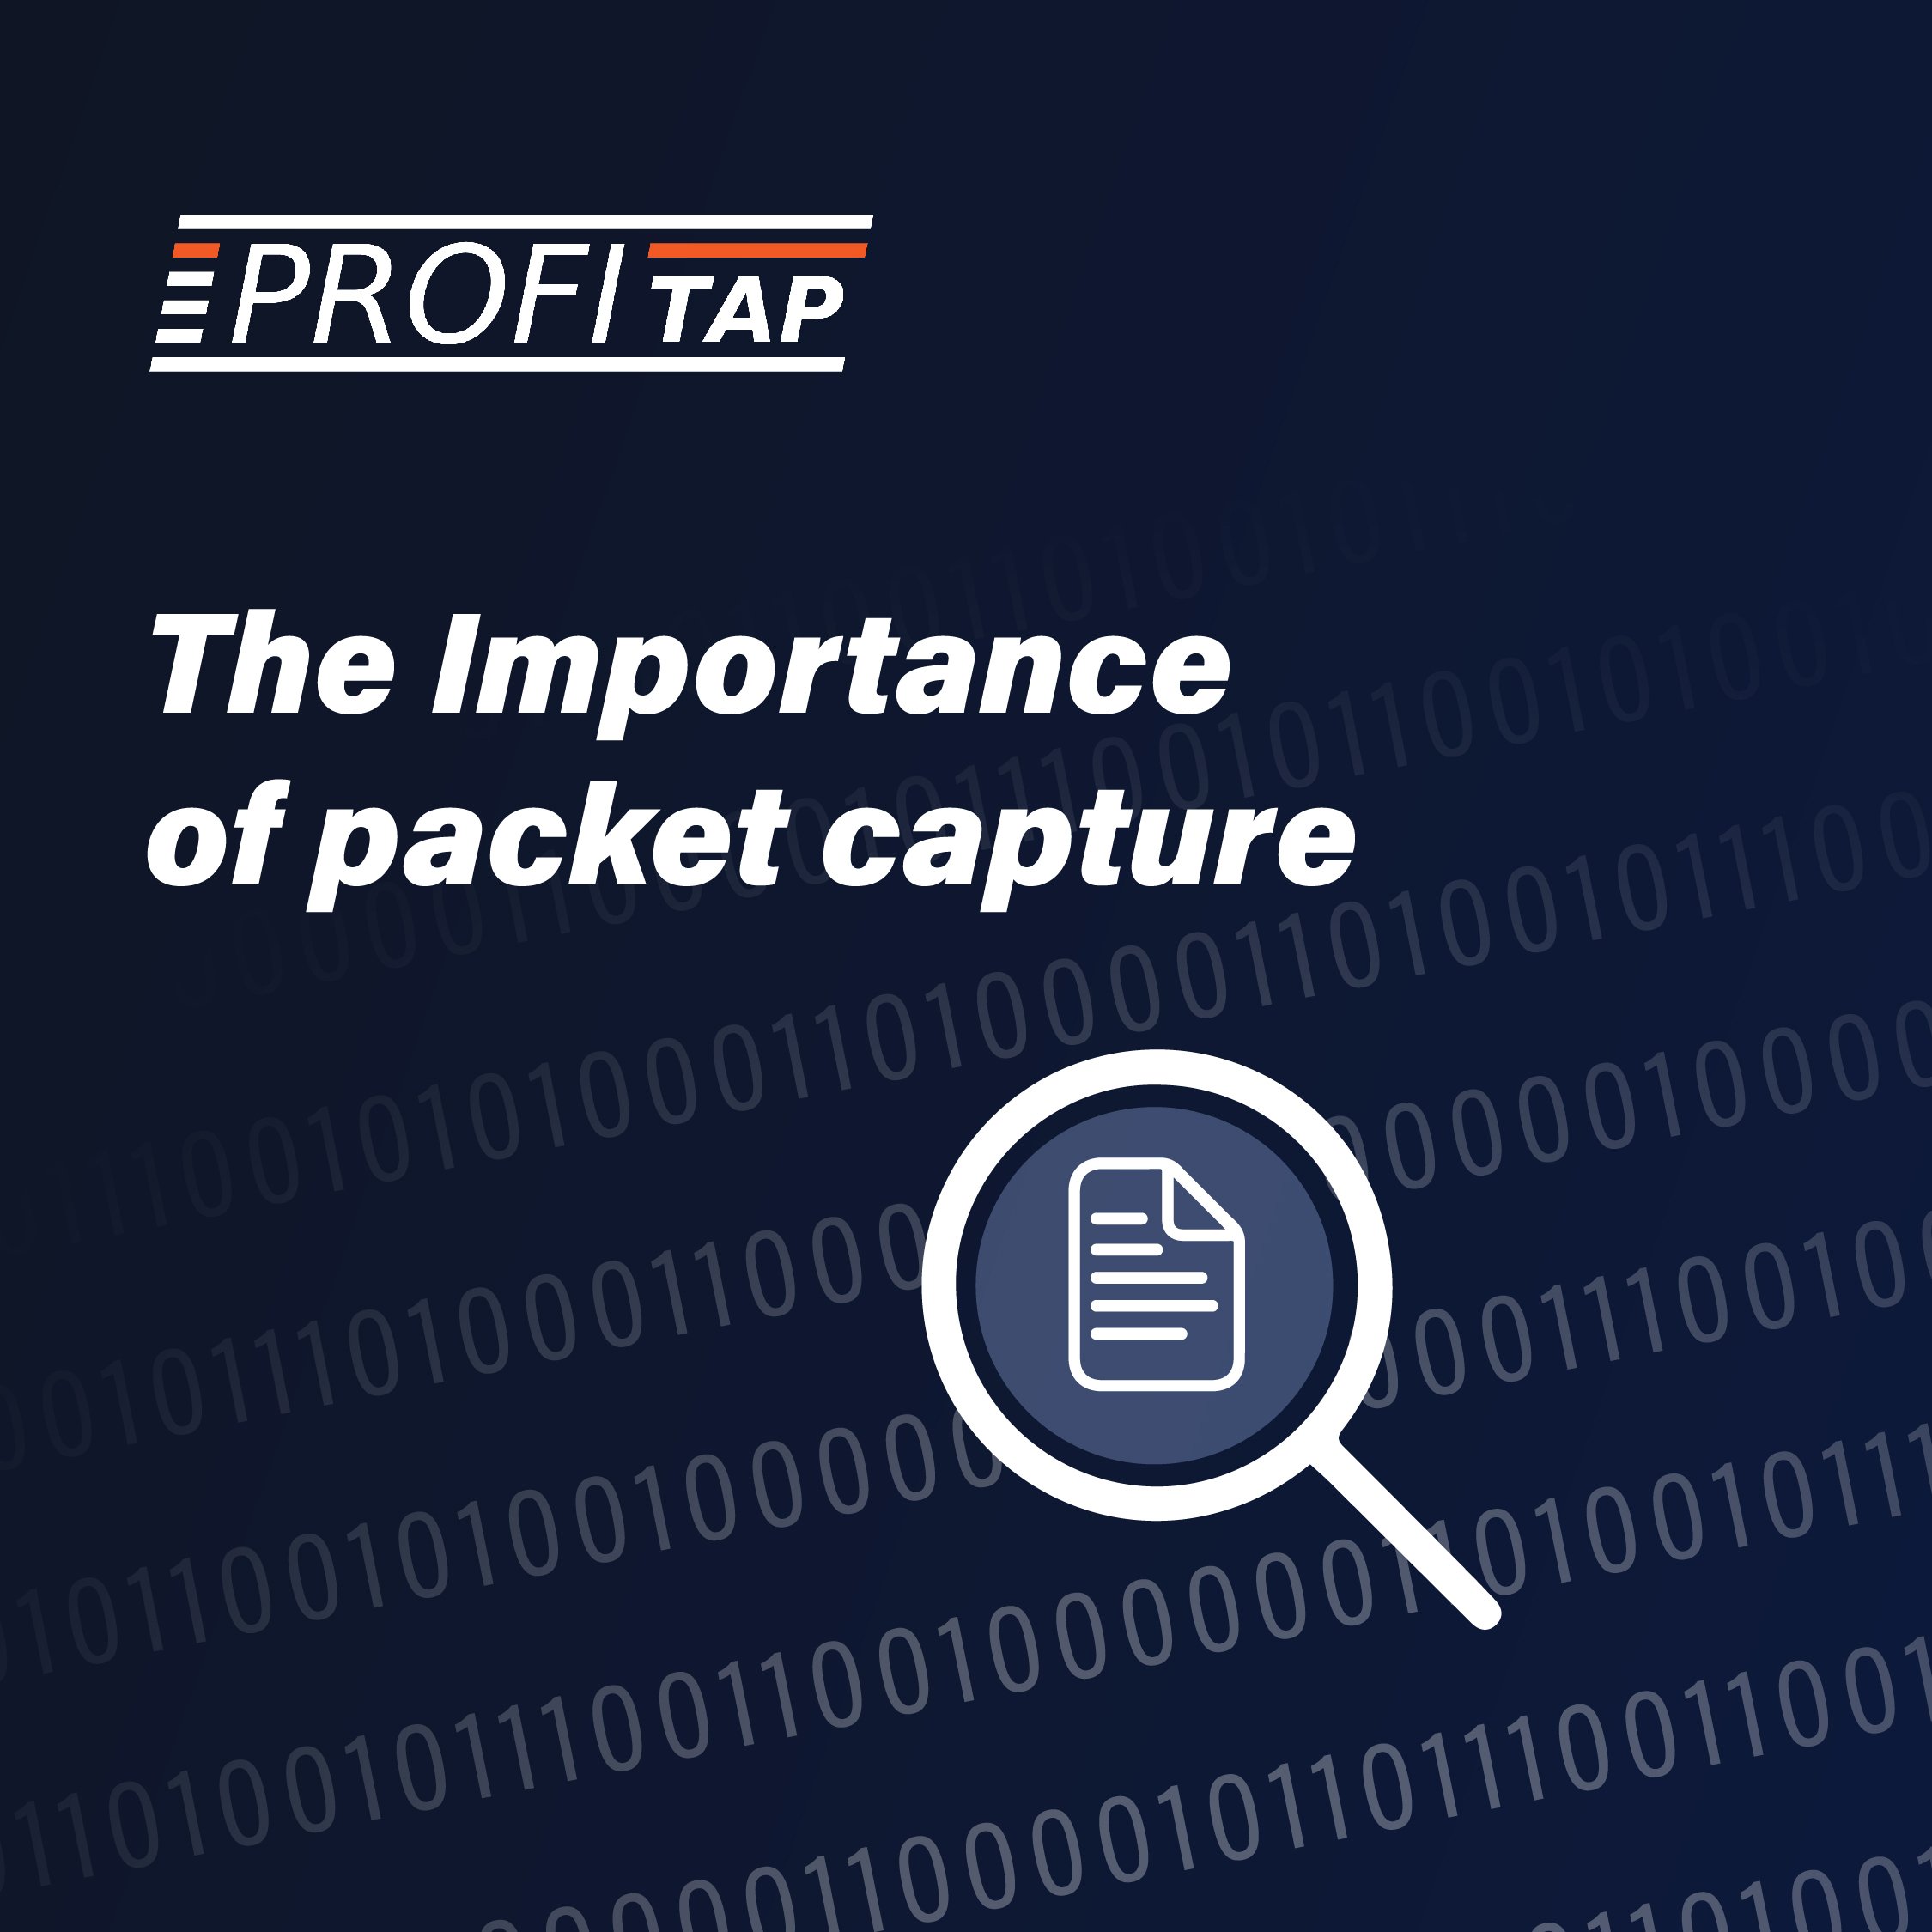 The importance of packet capture